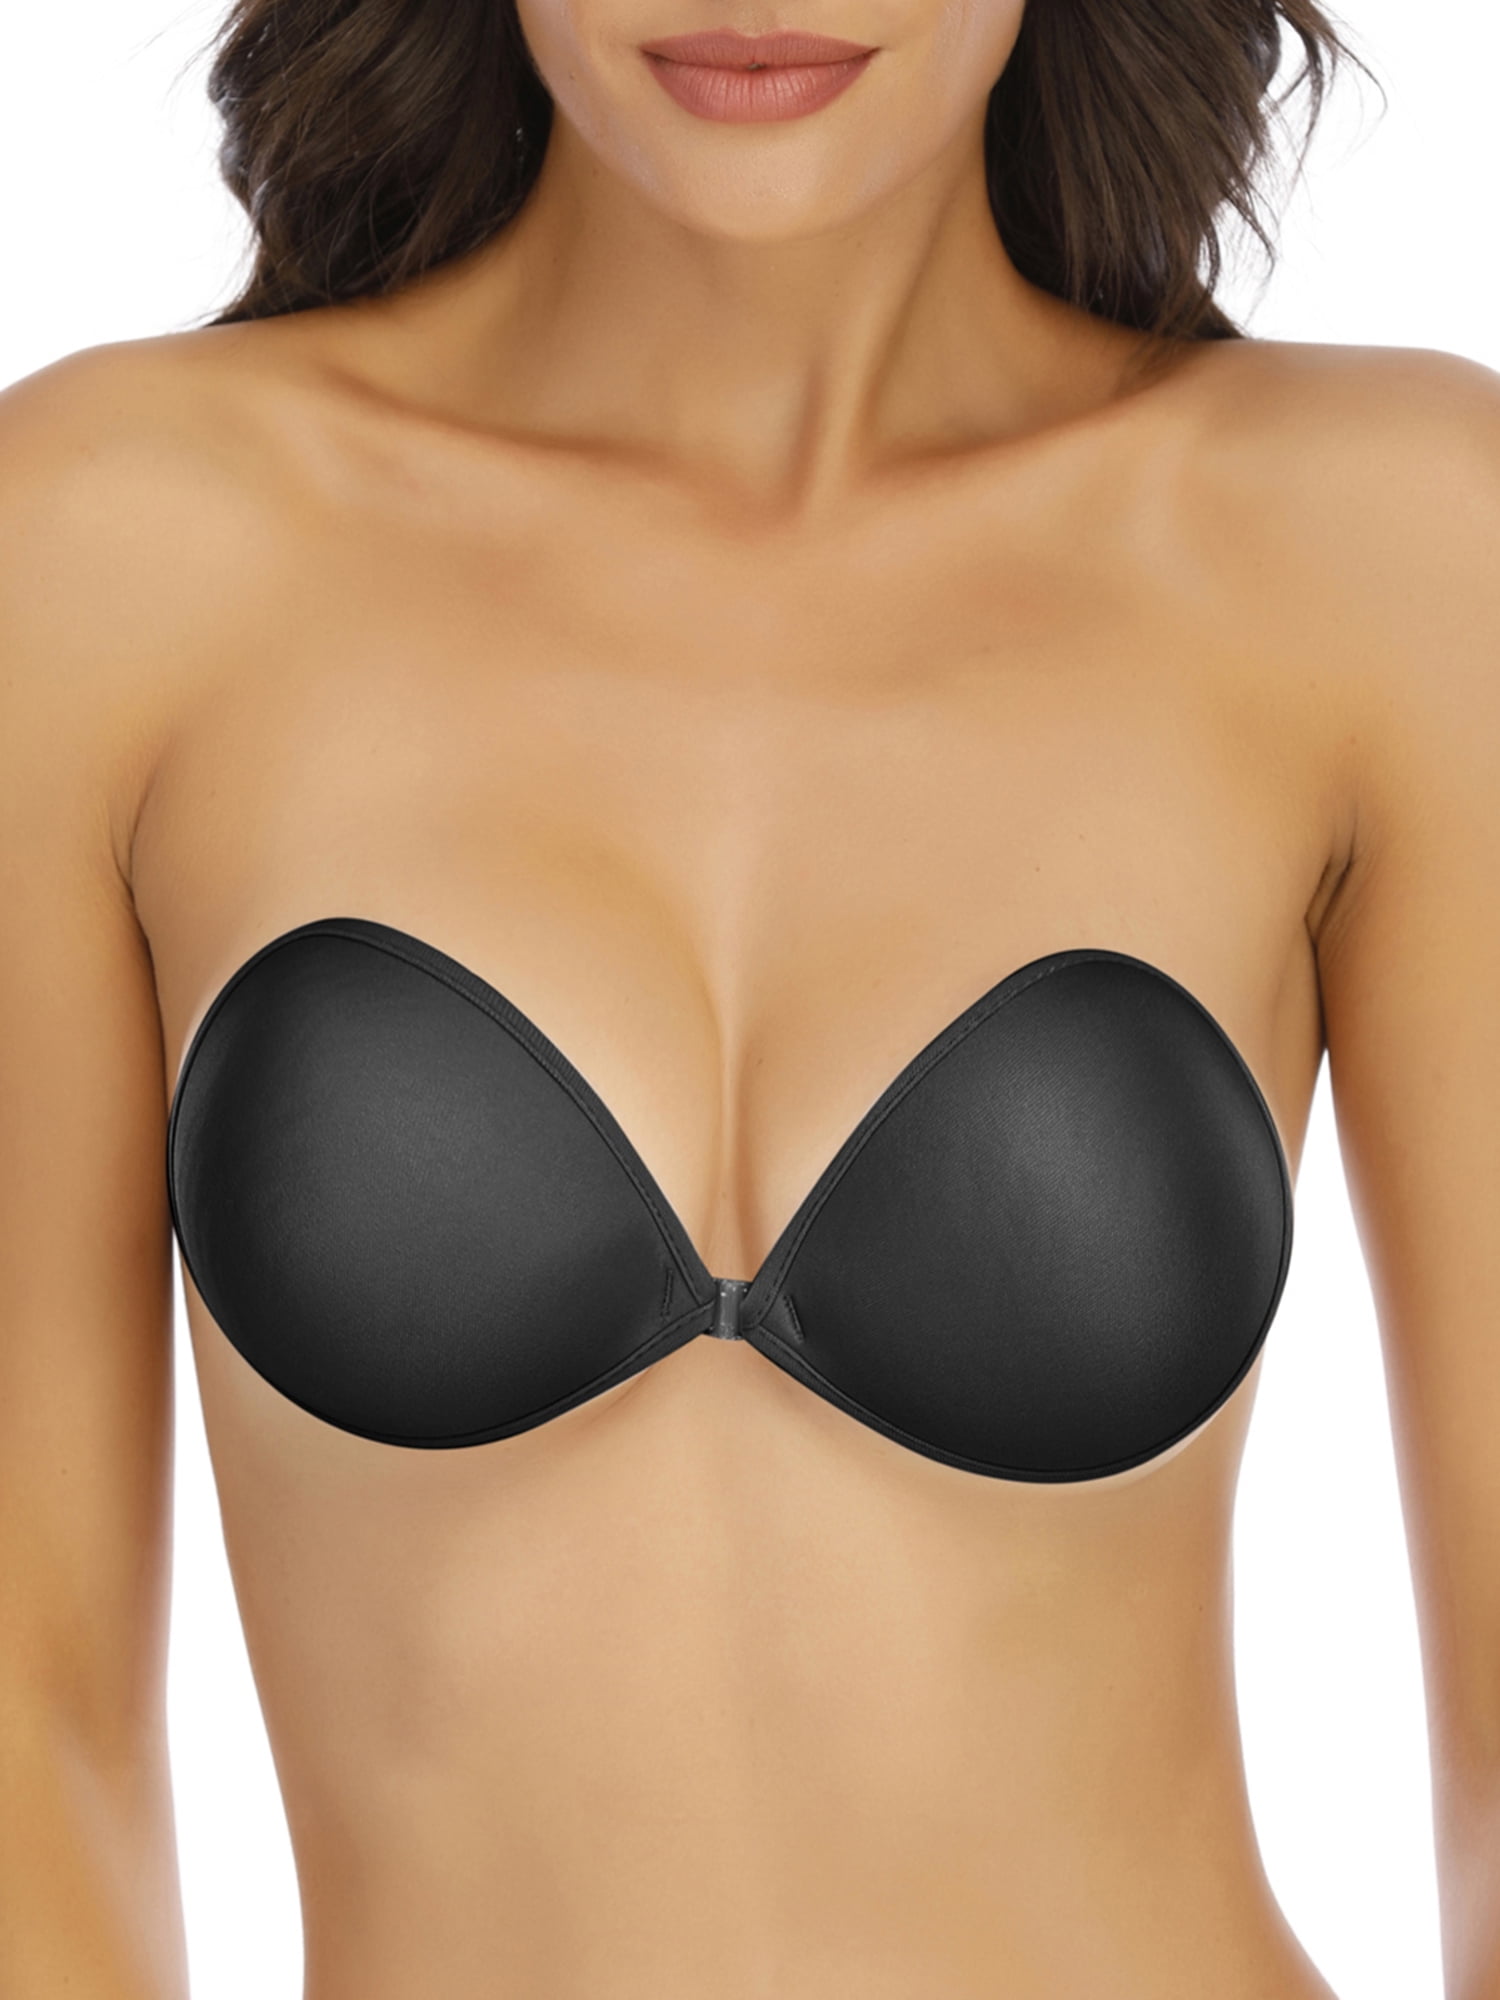 YouLoveIt Invisible Push-up Silicone Bra Strapless Backless Bra Women  Silicone Bras Women Breathable Self-Adhesive Breast Lifting Bra 